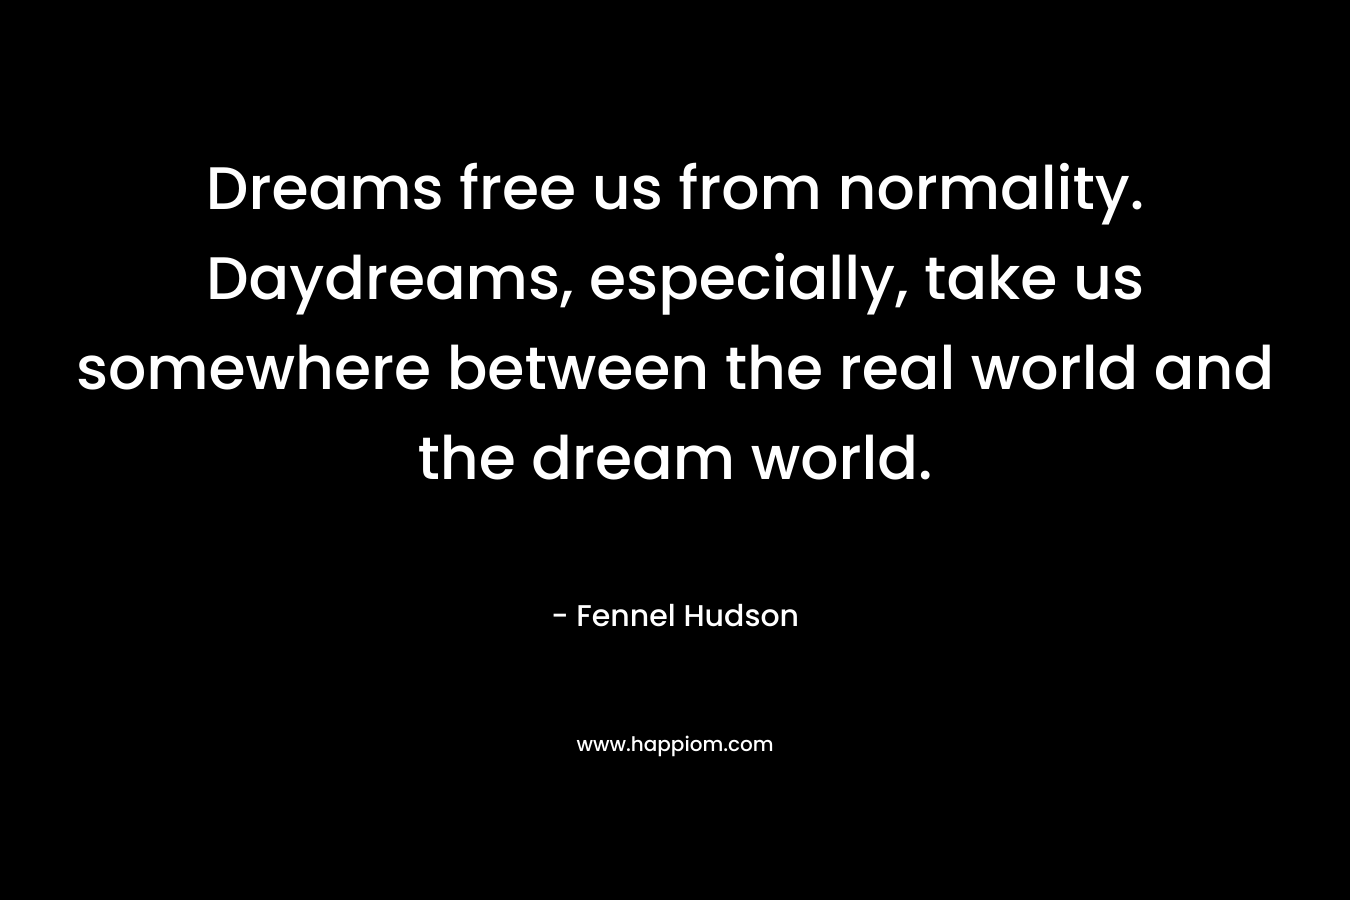 Dreams free us from normality. Daydreams, especially, take us somewhere between the real world and the dream world. – Fennel Hudson